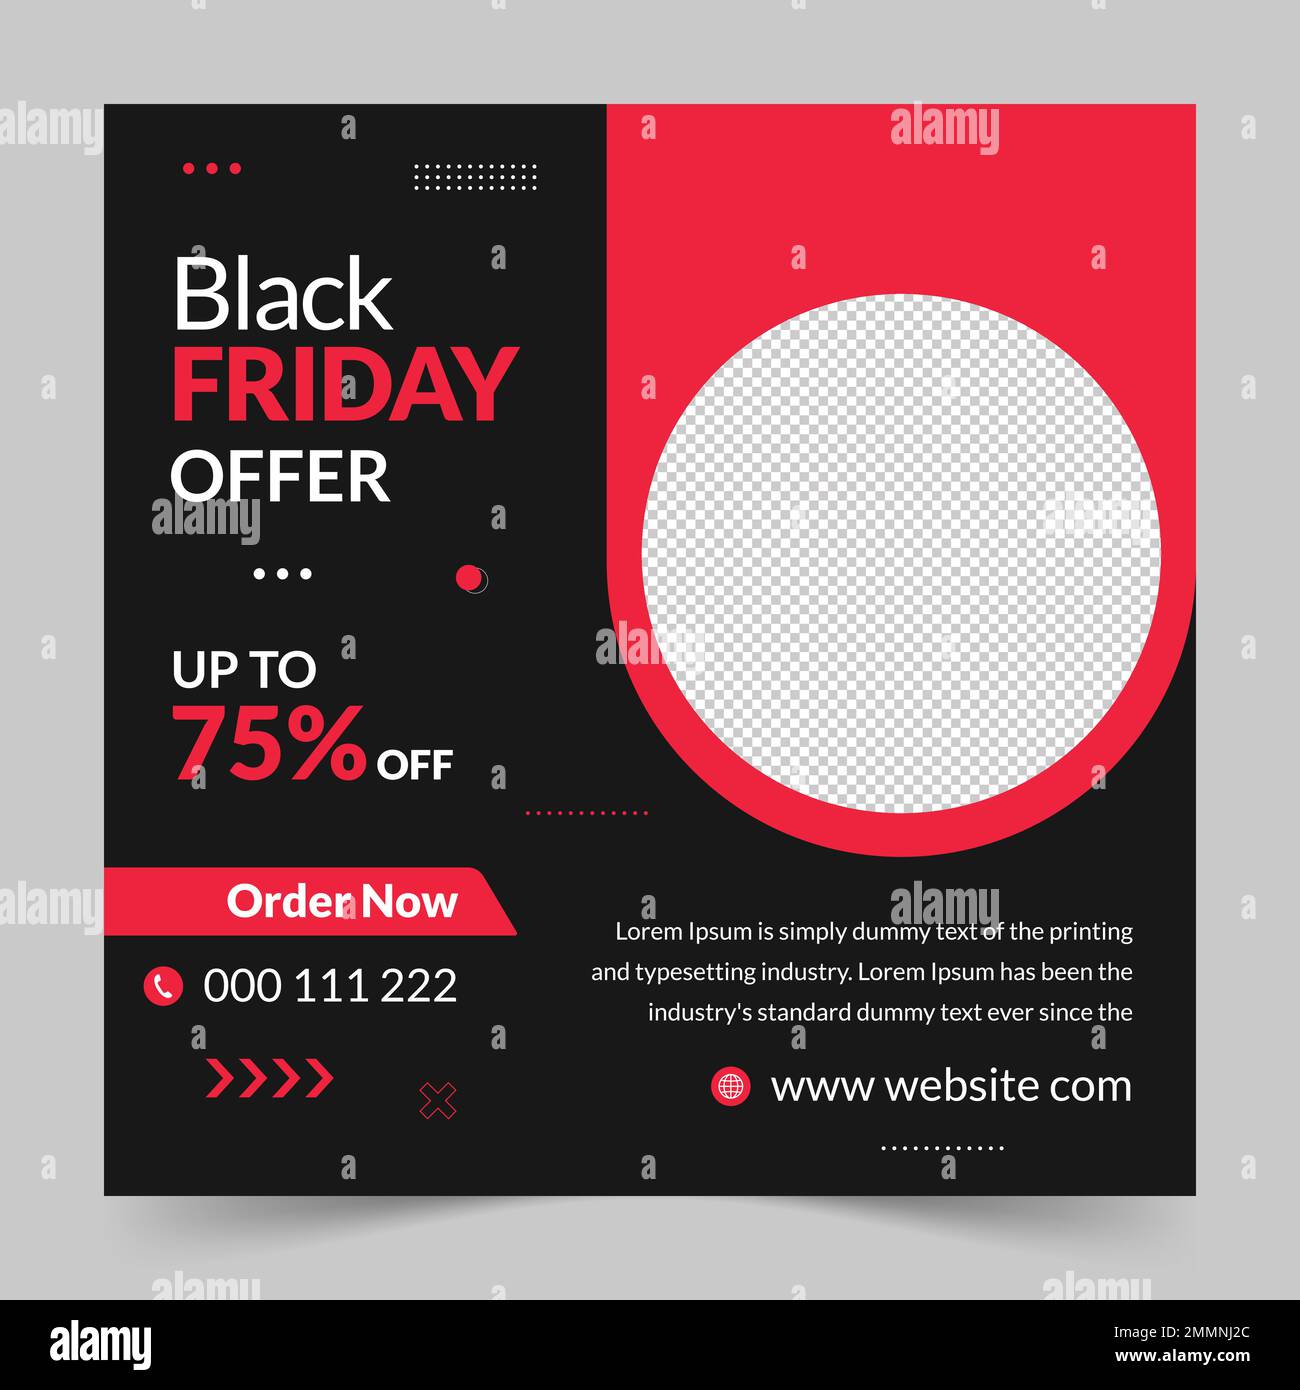 Black friday season sale social media post and web banner template for digital marketing. Trendy editable template for product promotion Stock Vector